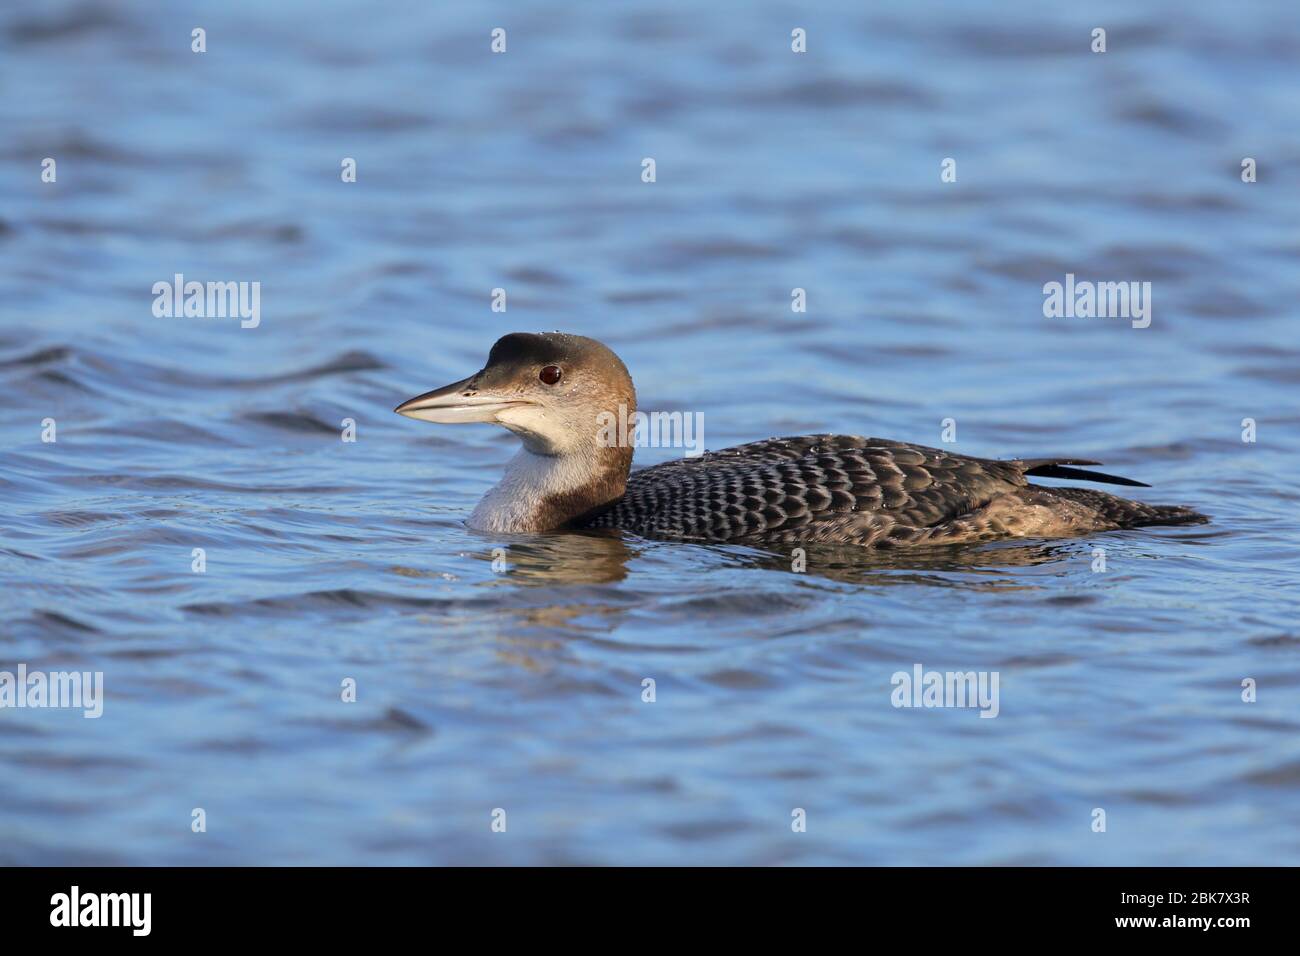 A juvenile Great northern Diver or Common Loon (Gavia immer) on a lake in England in winter Stock Photo